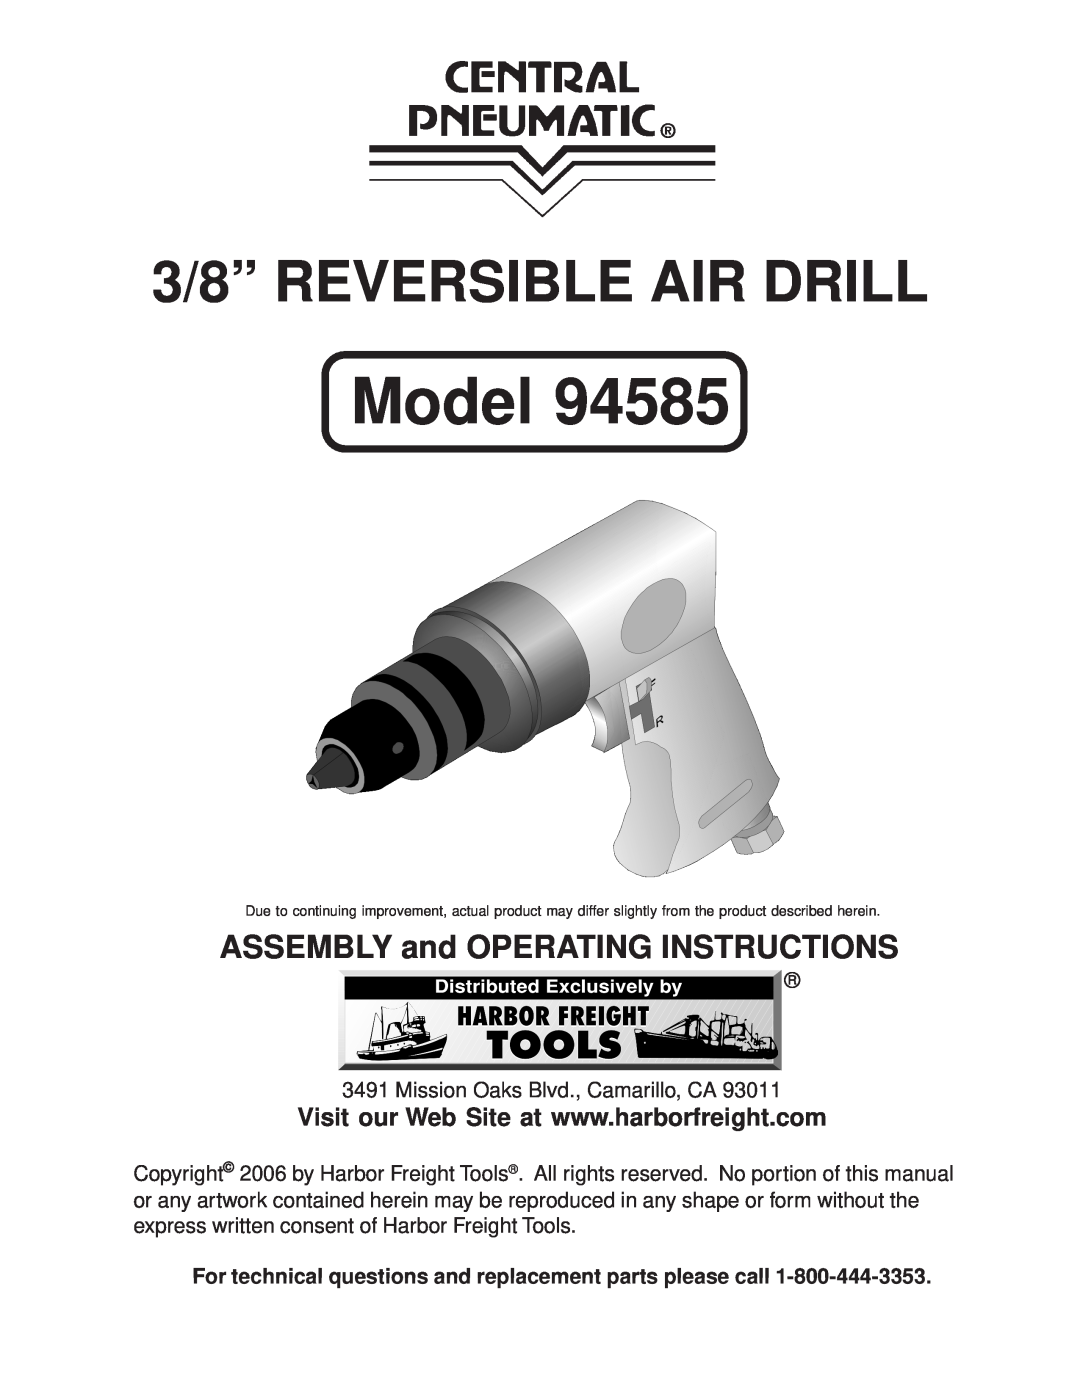 Harbor Freight Tools 94585 operating instructions Model, 3/8” REVERSIBLE AIR DRILL, ASSEMBLY and OPERATING INSTRUCTIONS 